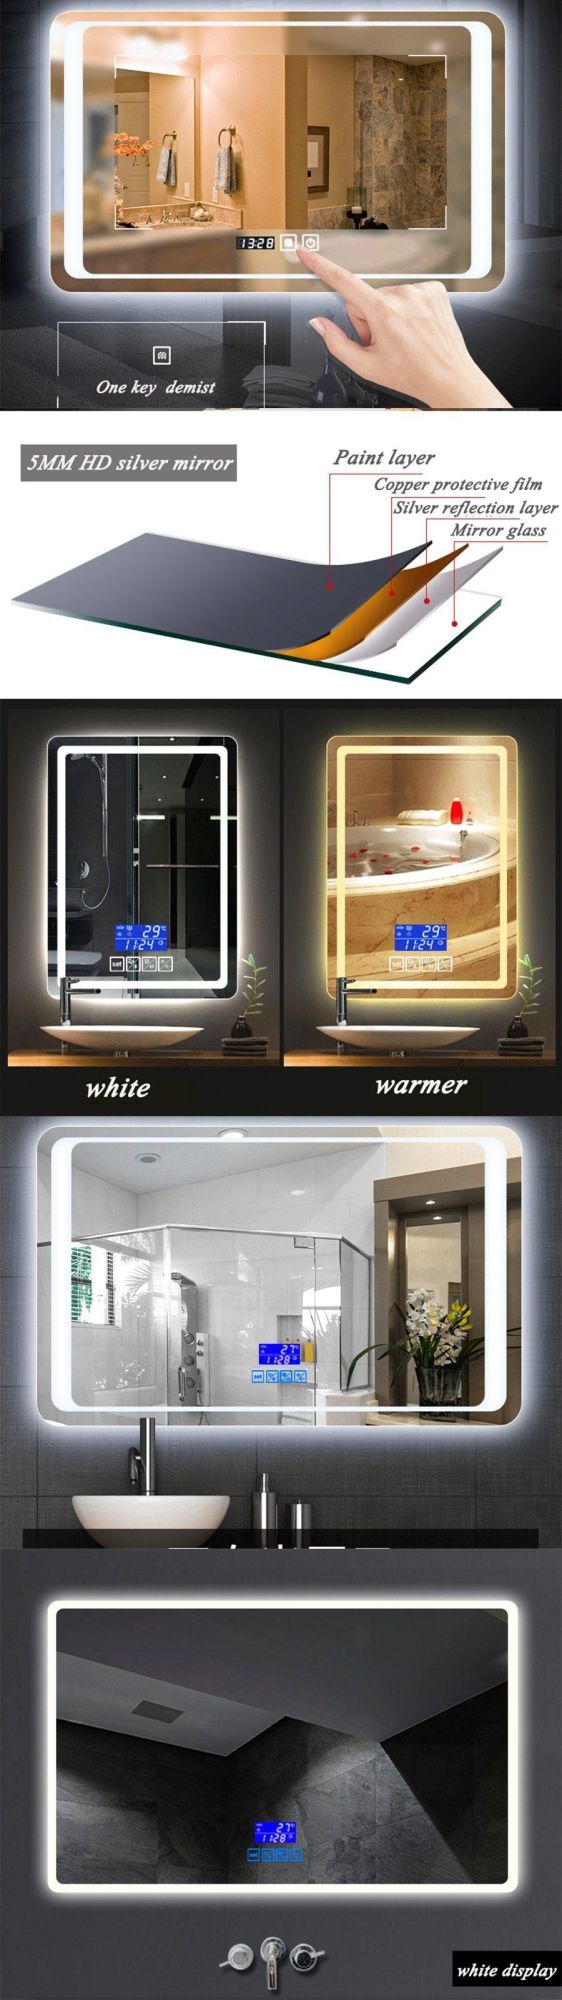 Cheap Price for Bathroom LED Light Cosmetic Mirror Easy to Clean (Bg-007)